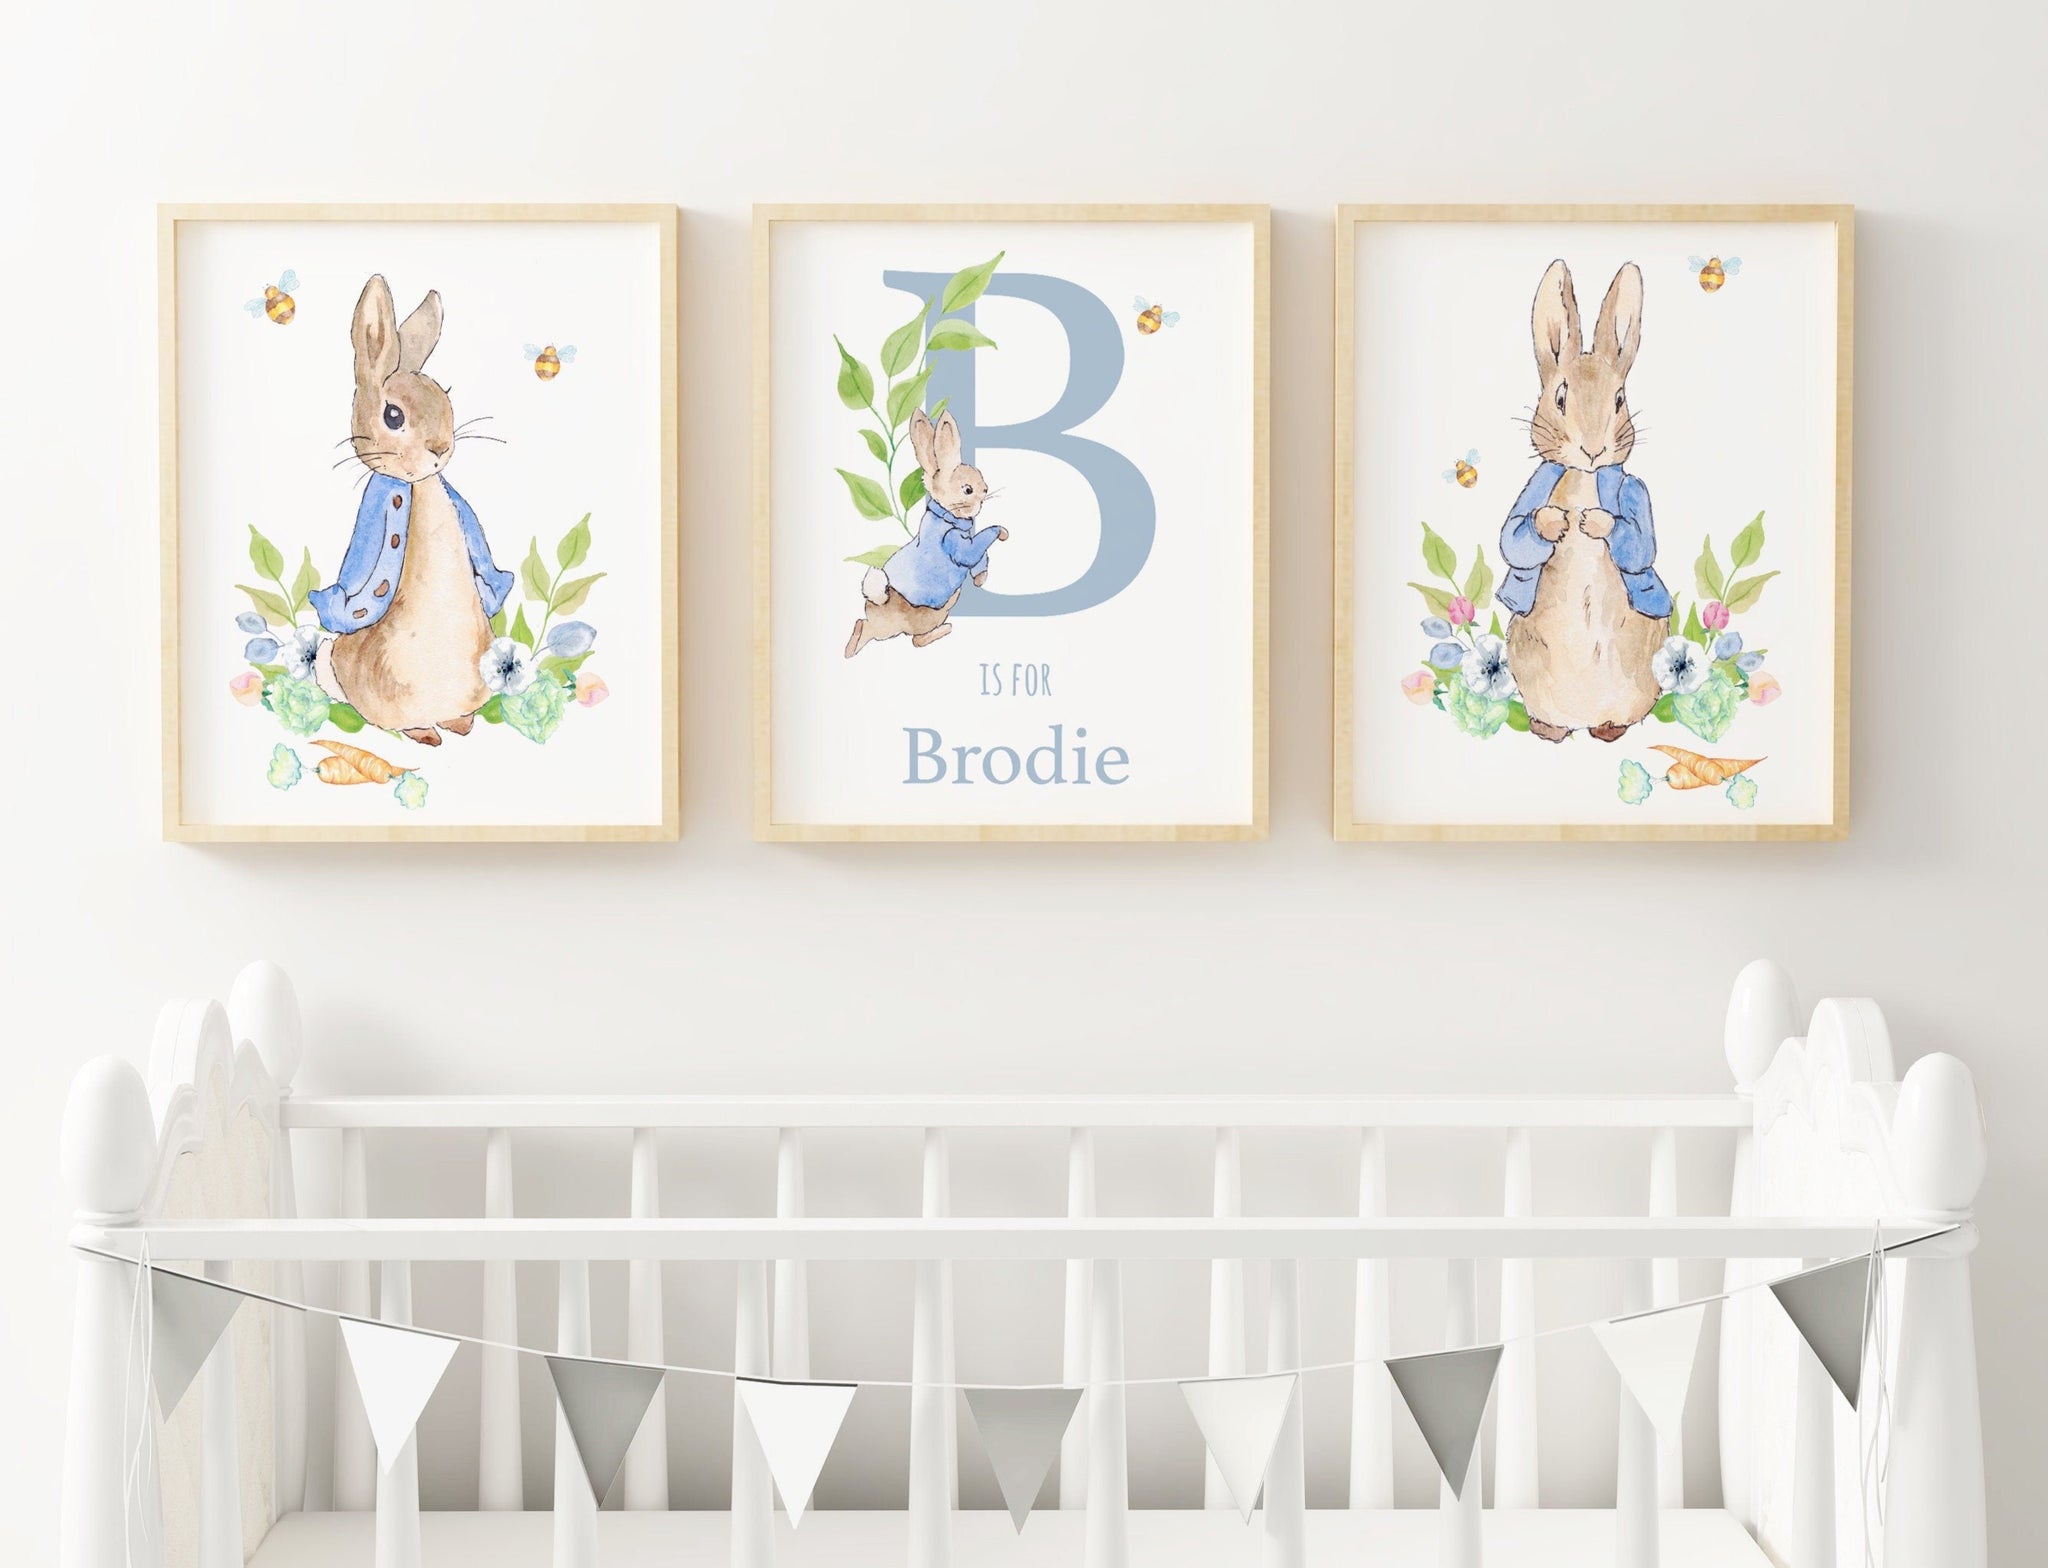 Custom Personalised Name Peter Rabbit Print Set, Blue Beatrix Potter Baby Nursery Decor Gender Neutral Wall Art, Set of 3, A3, A4 or A5